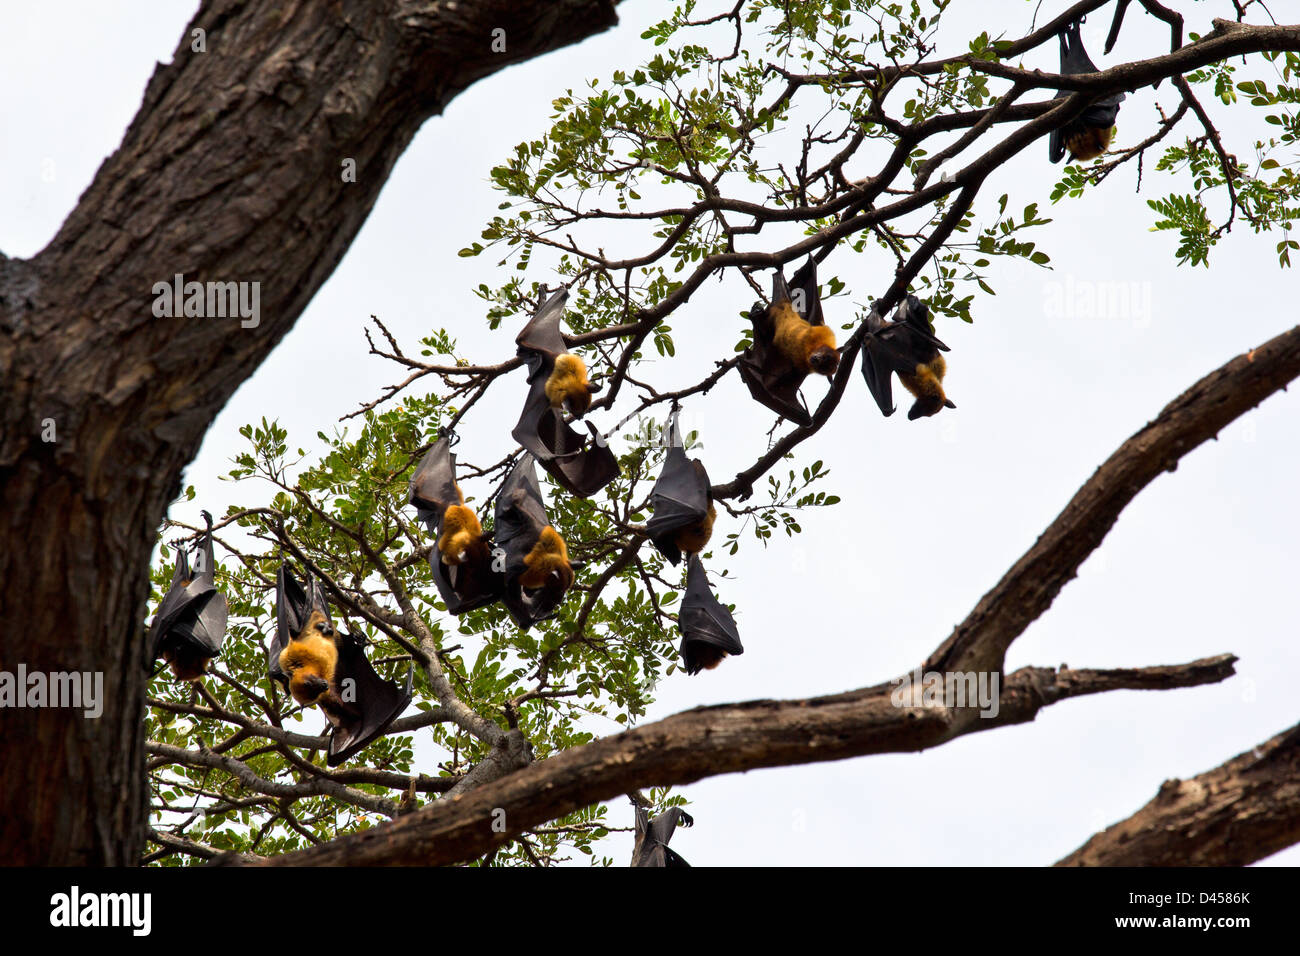 HUNDREDS OF FLYING FOXES ROOSTING IN THE TREES DURING DAYLIGHT HOURS SRI LANKA Stock Photo